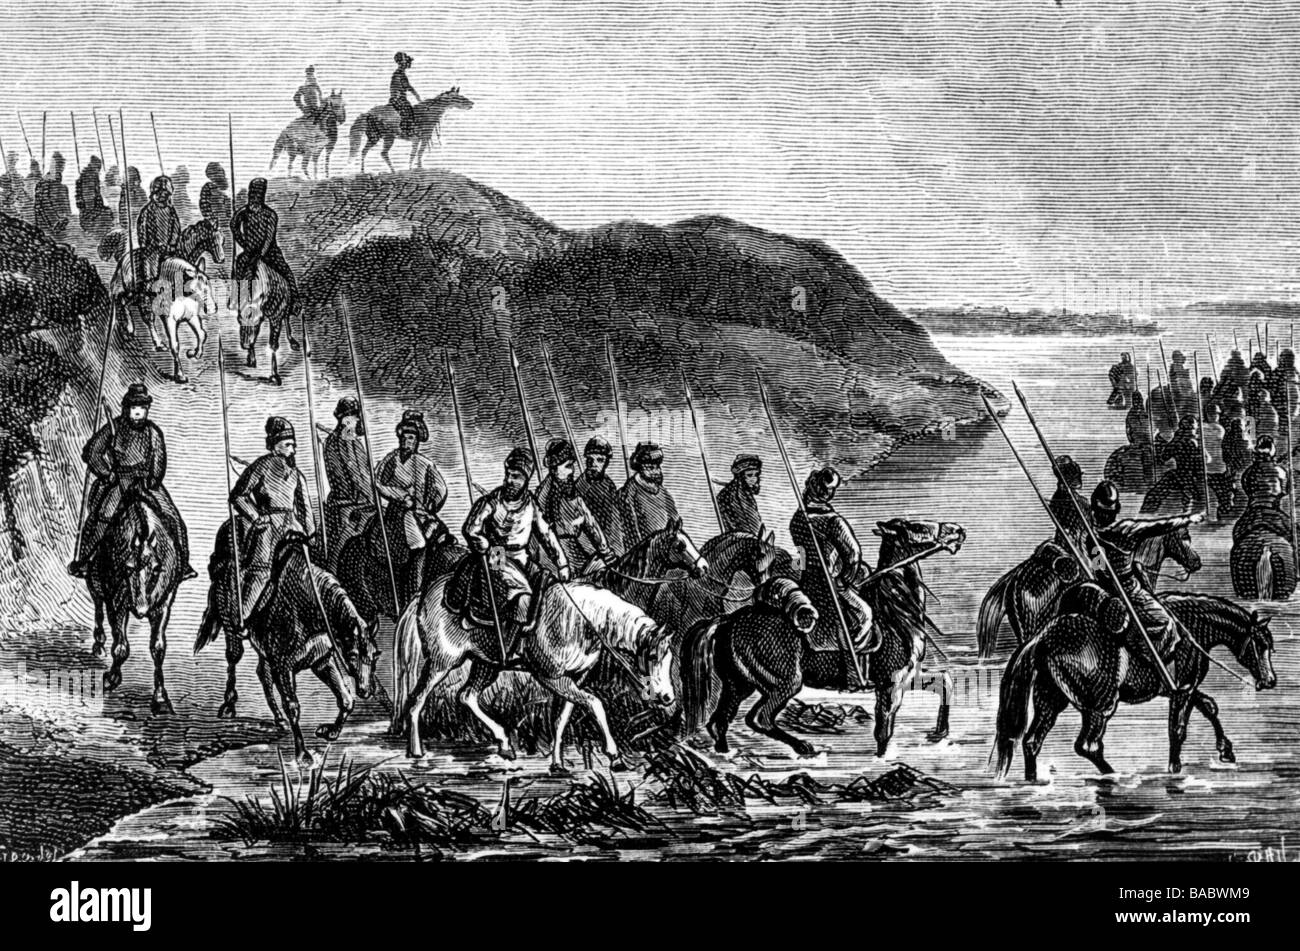 Yermak Timofeyevich, circa 1538 - 6.8.1585, Cossack leader, 'Conquerer of Sibiria', scene, crossing the Tobol river with his Cossacks, wood engraving, 19th century, Stock Photo